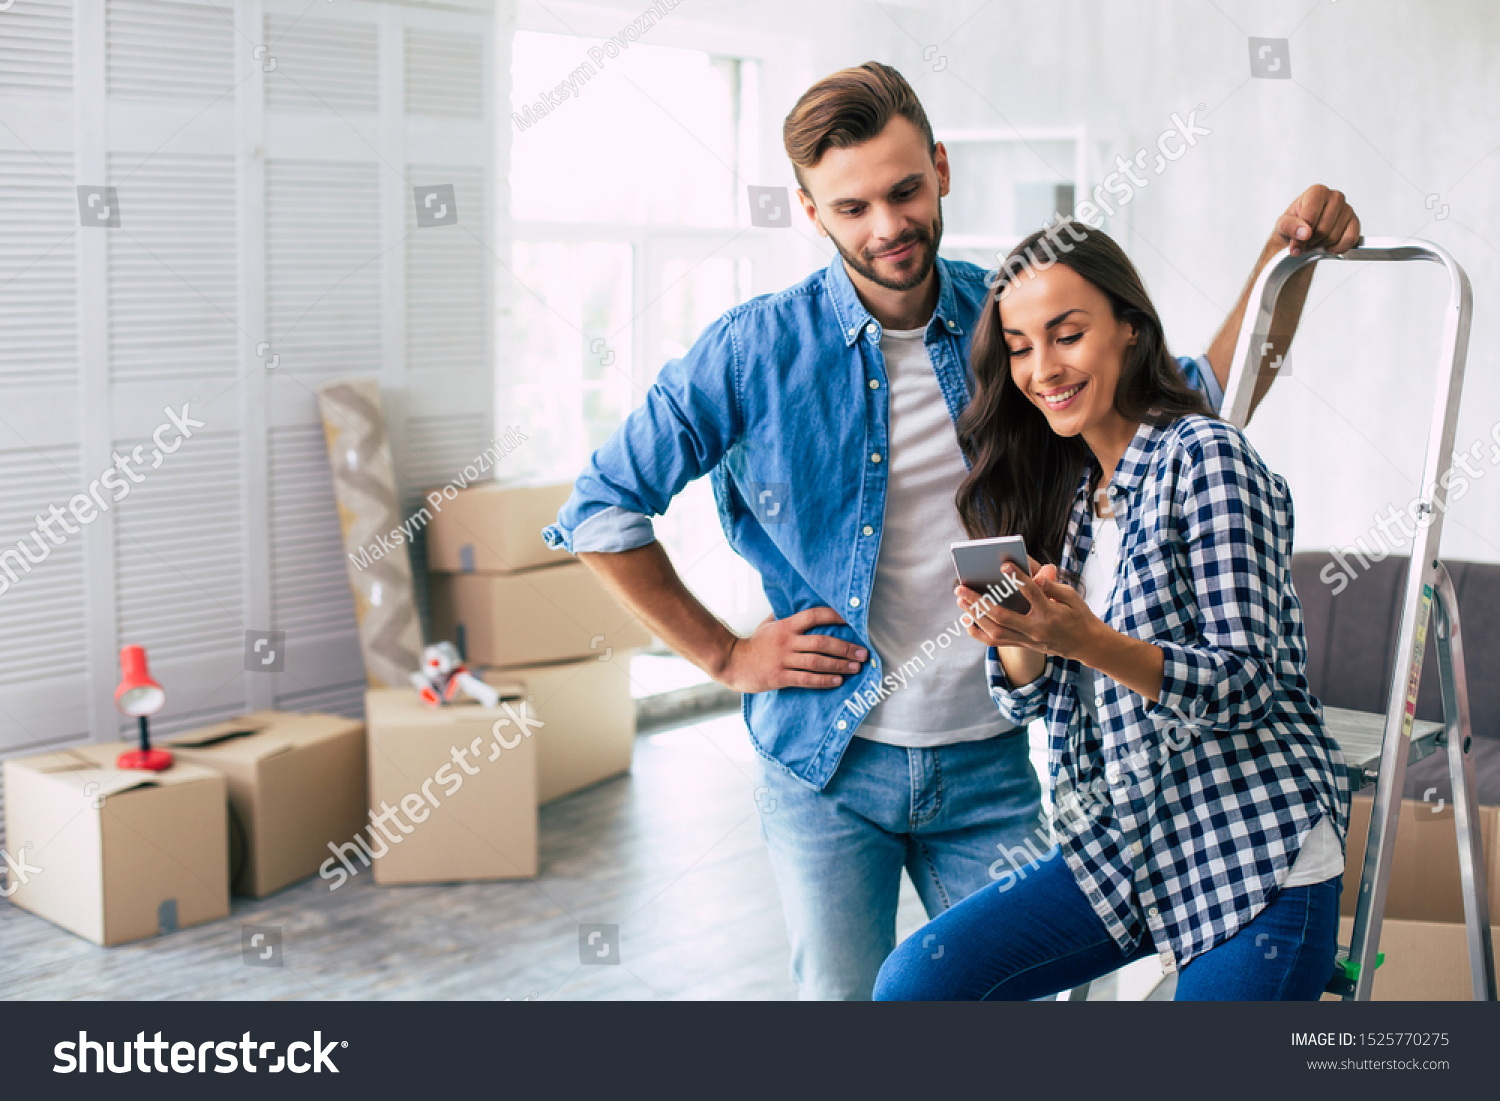 Checking for ideas. Handsome man in denim outfit is checking something in the smartphone together with his gorgeous wife, leaning on the ladder with his left hand. House moving concept. #1525770275